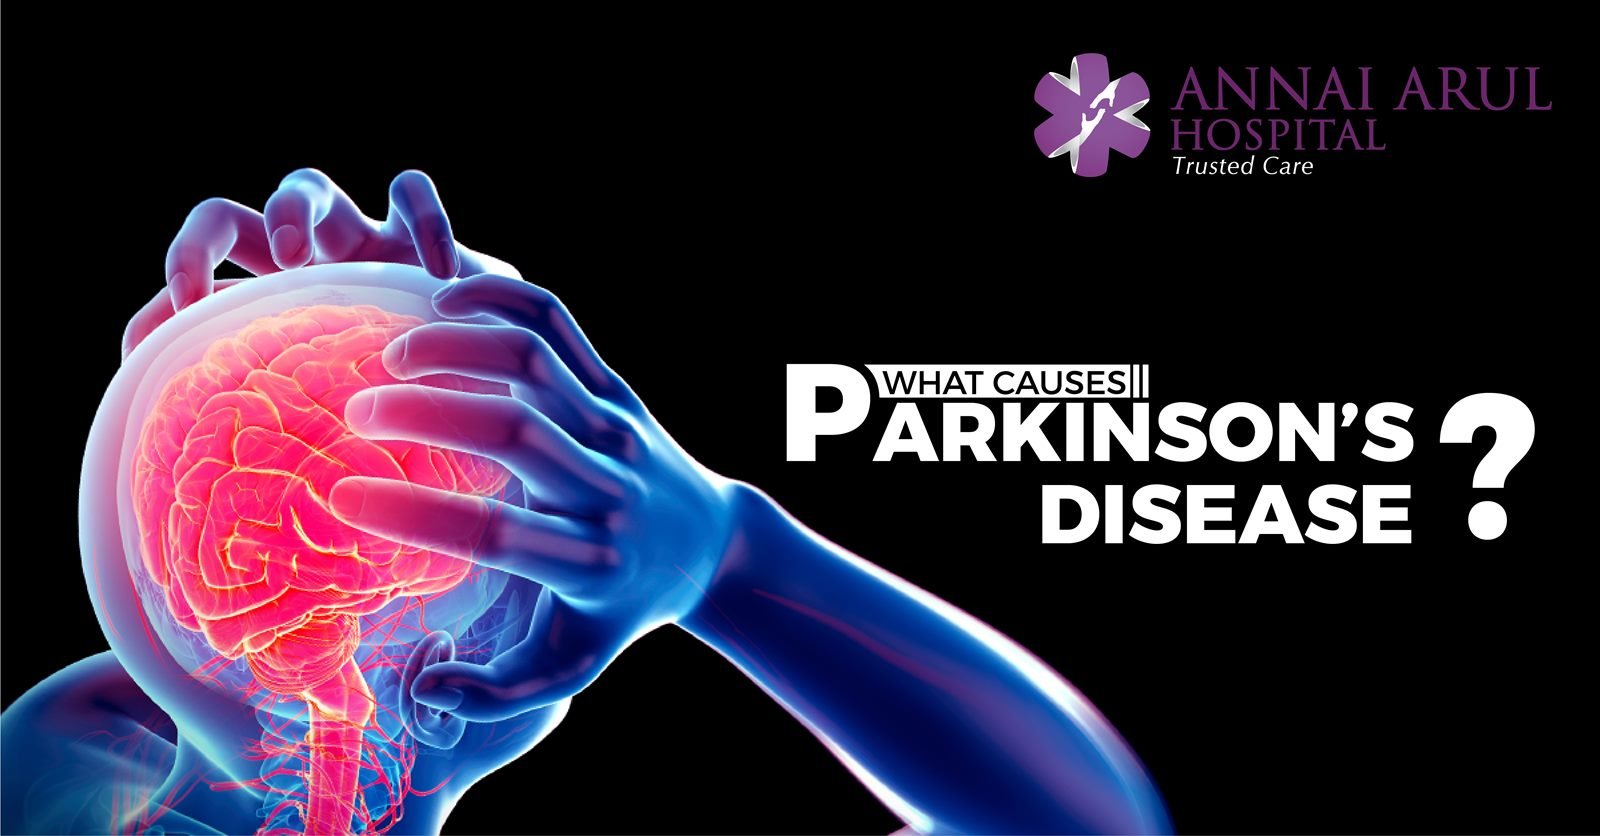 WHAT CAUSES PARKINSONS DISEASE?  Multispeciality Hospitals in Chennai